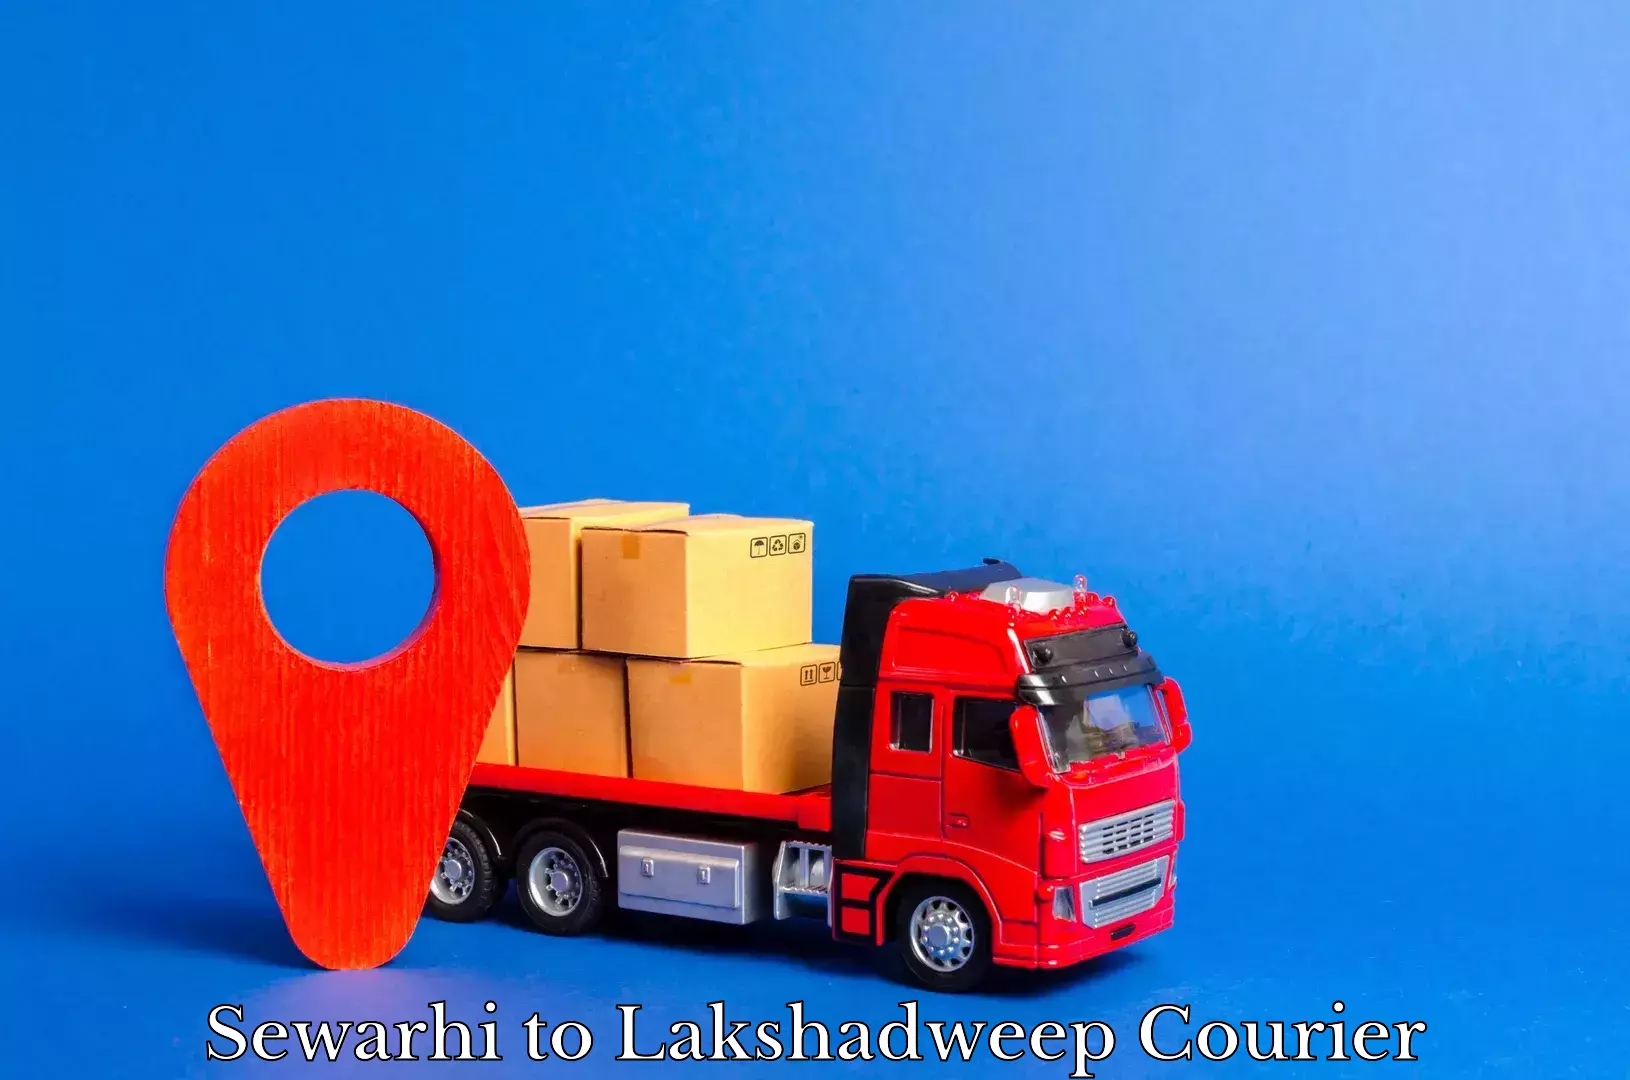 Courier service comparison in Sewarhi to Lakshadweep